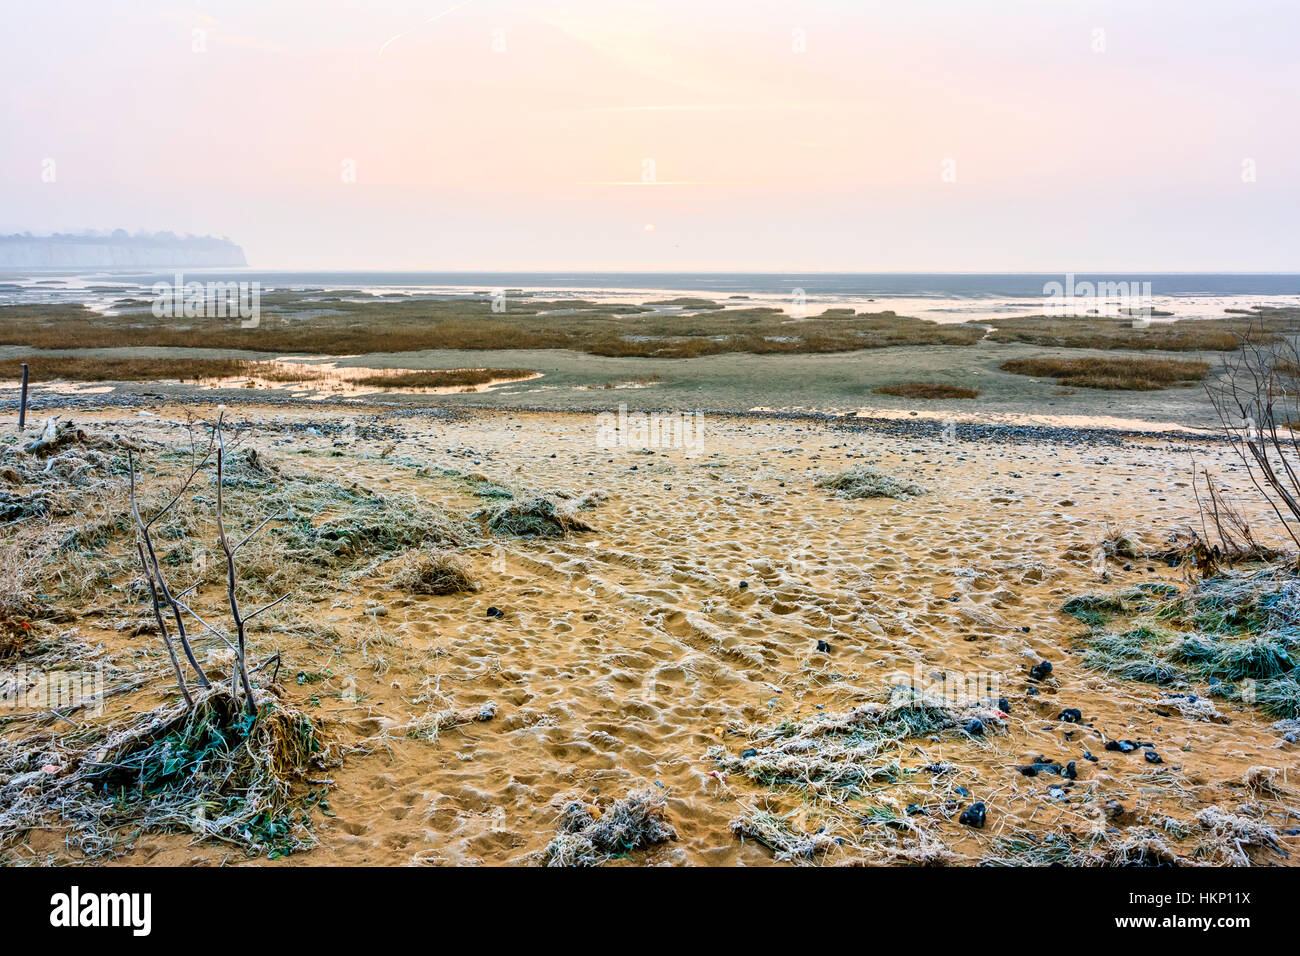 England, Ramsgate. Winter. Sunrise over the English Channel and Pegwell Bay. Frost on the beach, salt water marshes with spartina grass at low tide. Stock Photo